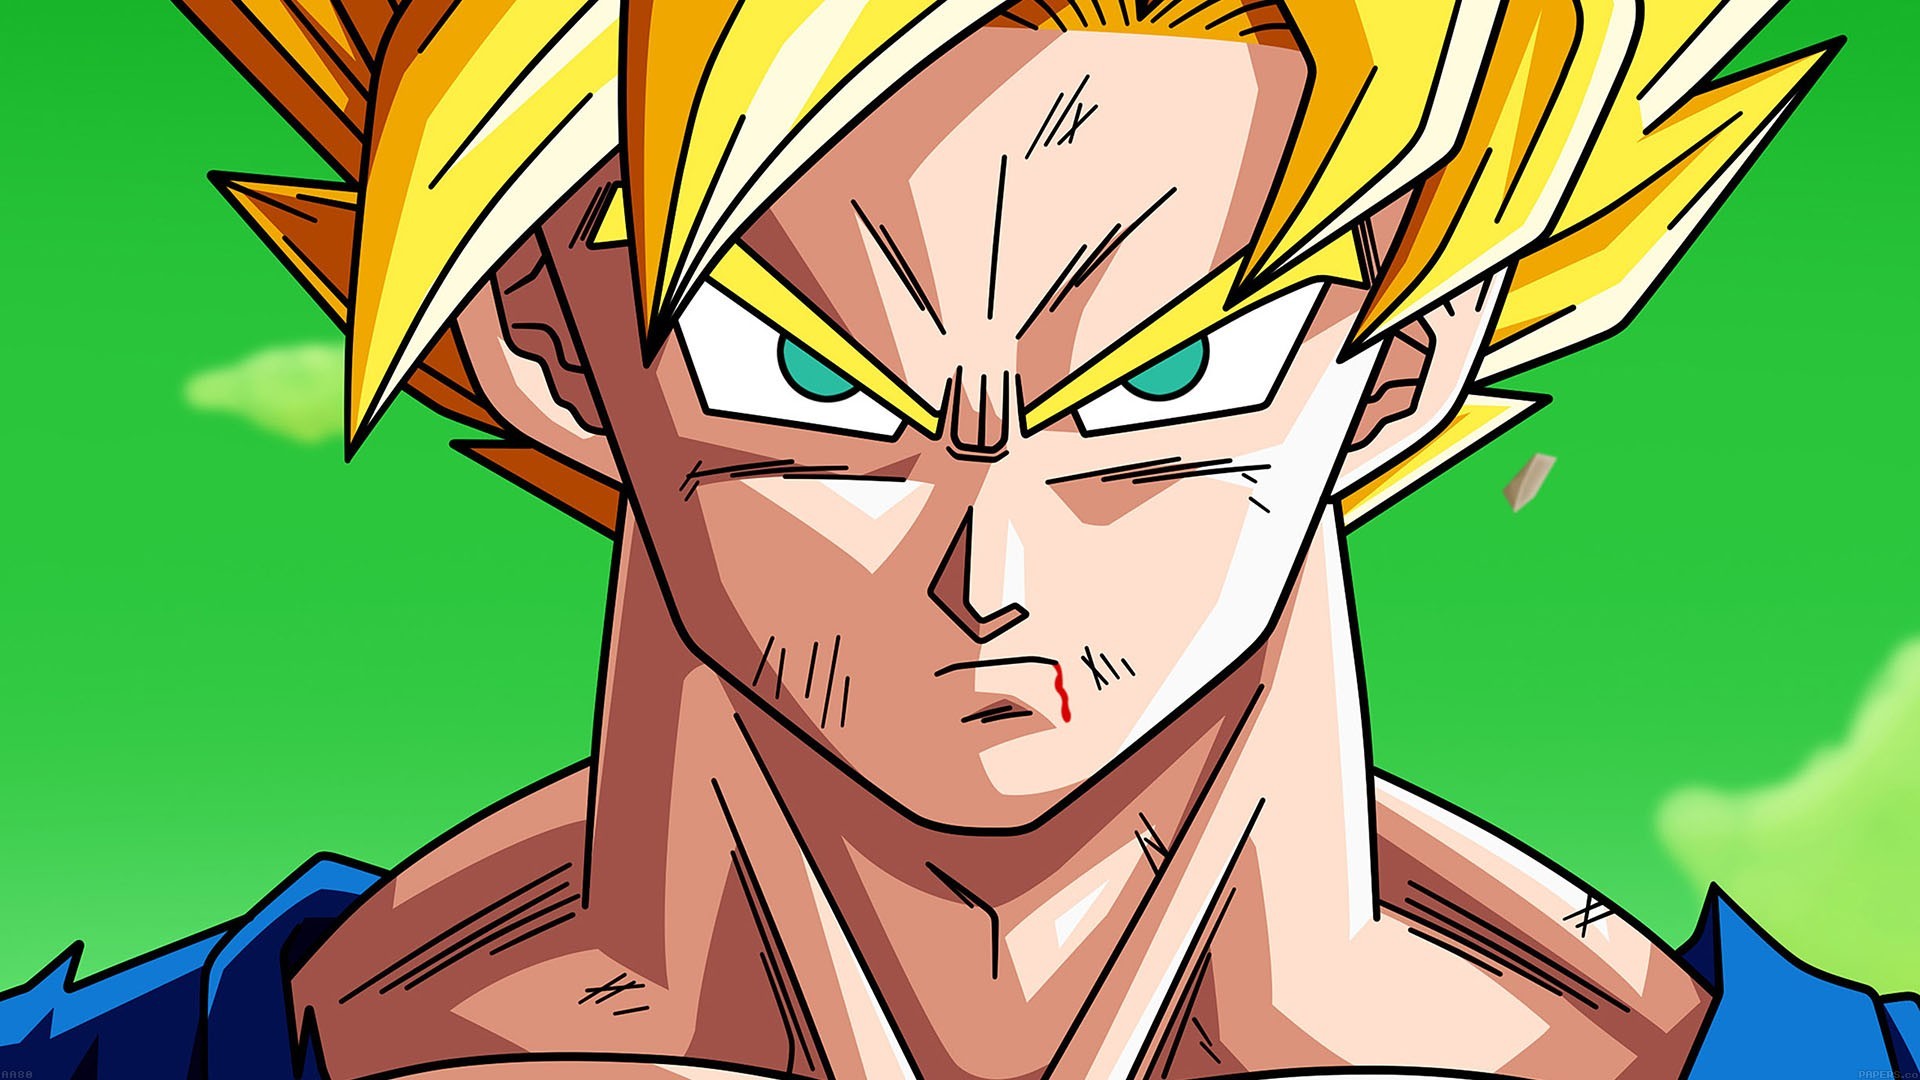 HD Wallpaper Goku Super Saiyan with image resolution 1920x1080 pixel. You can make this wallpaper for your Desktop Computer Backgrounds, Mac Wallpapers, Android Lock screen or iPhone Screensavers